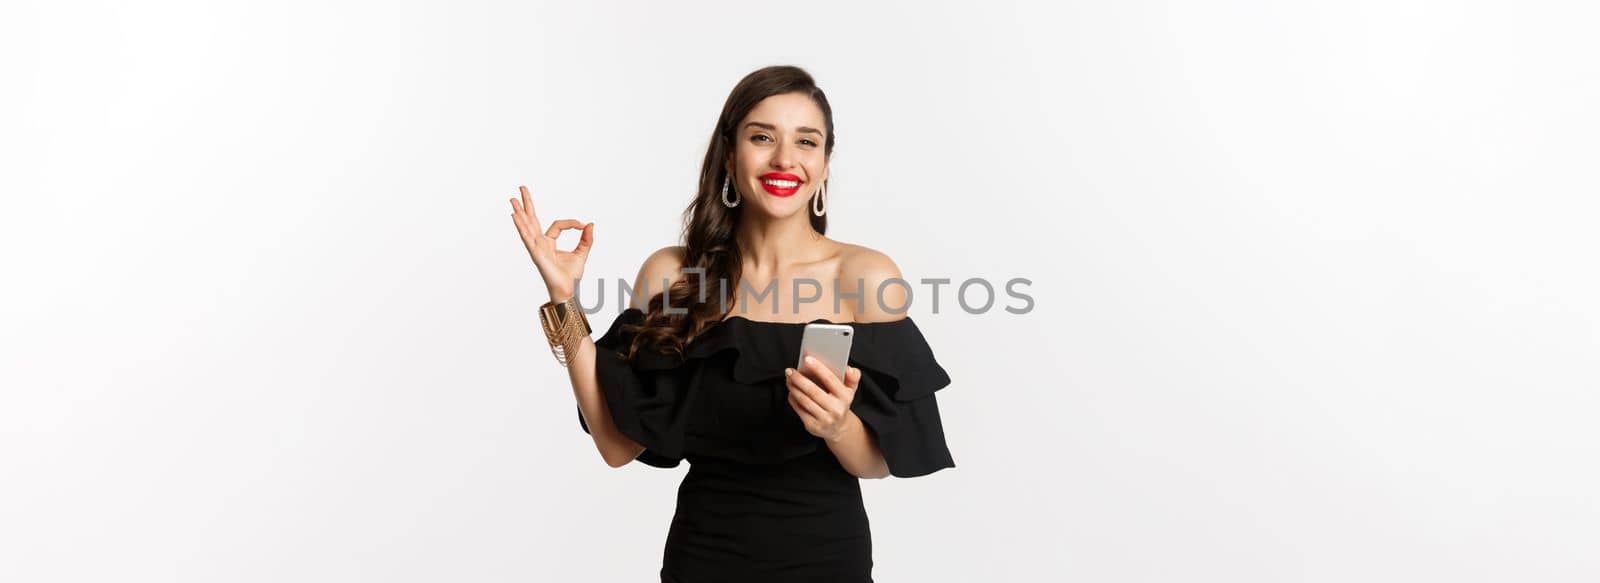 Online shopping concept. Attractive woman in trendy black dress, makeup, showing okay sign in approval and using mobile phone app, white background.